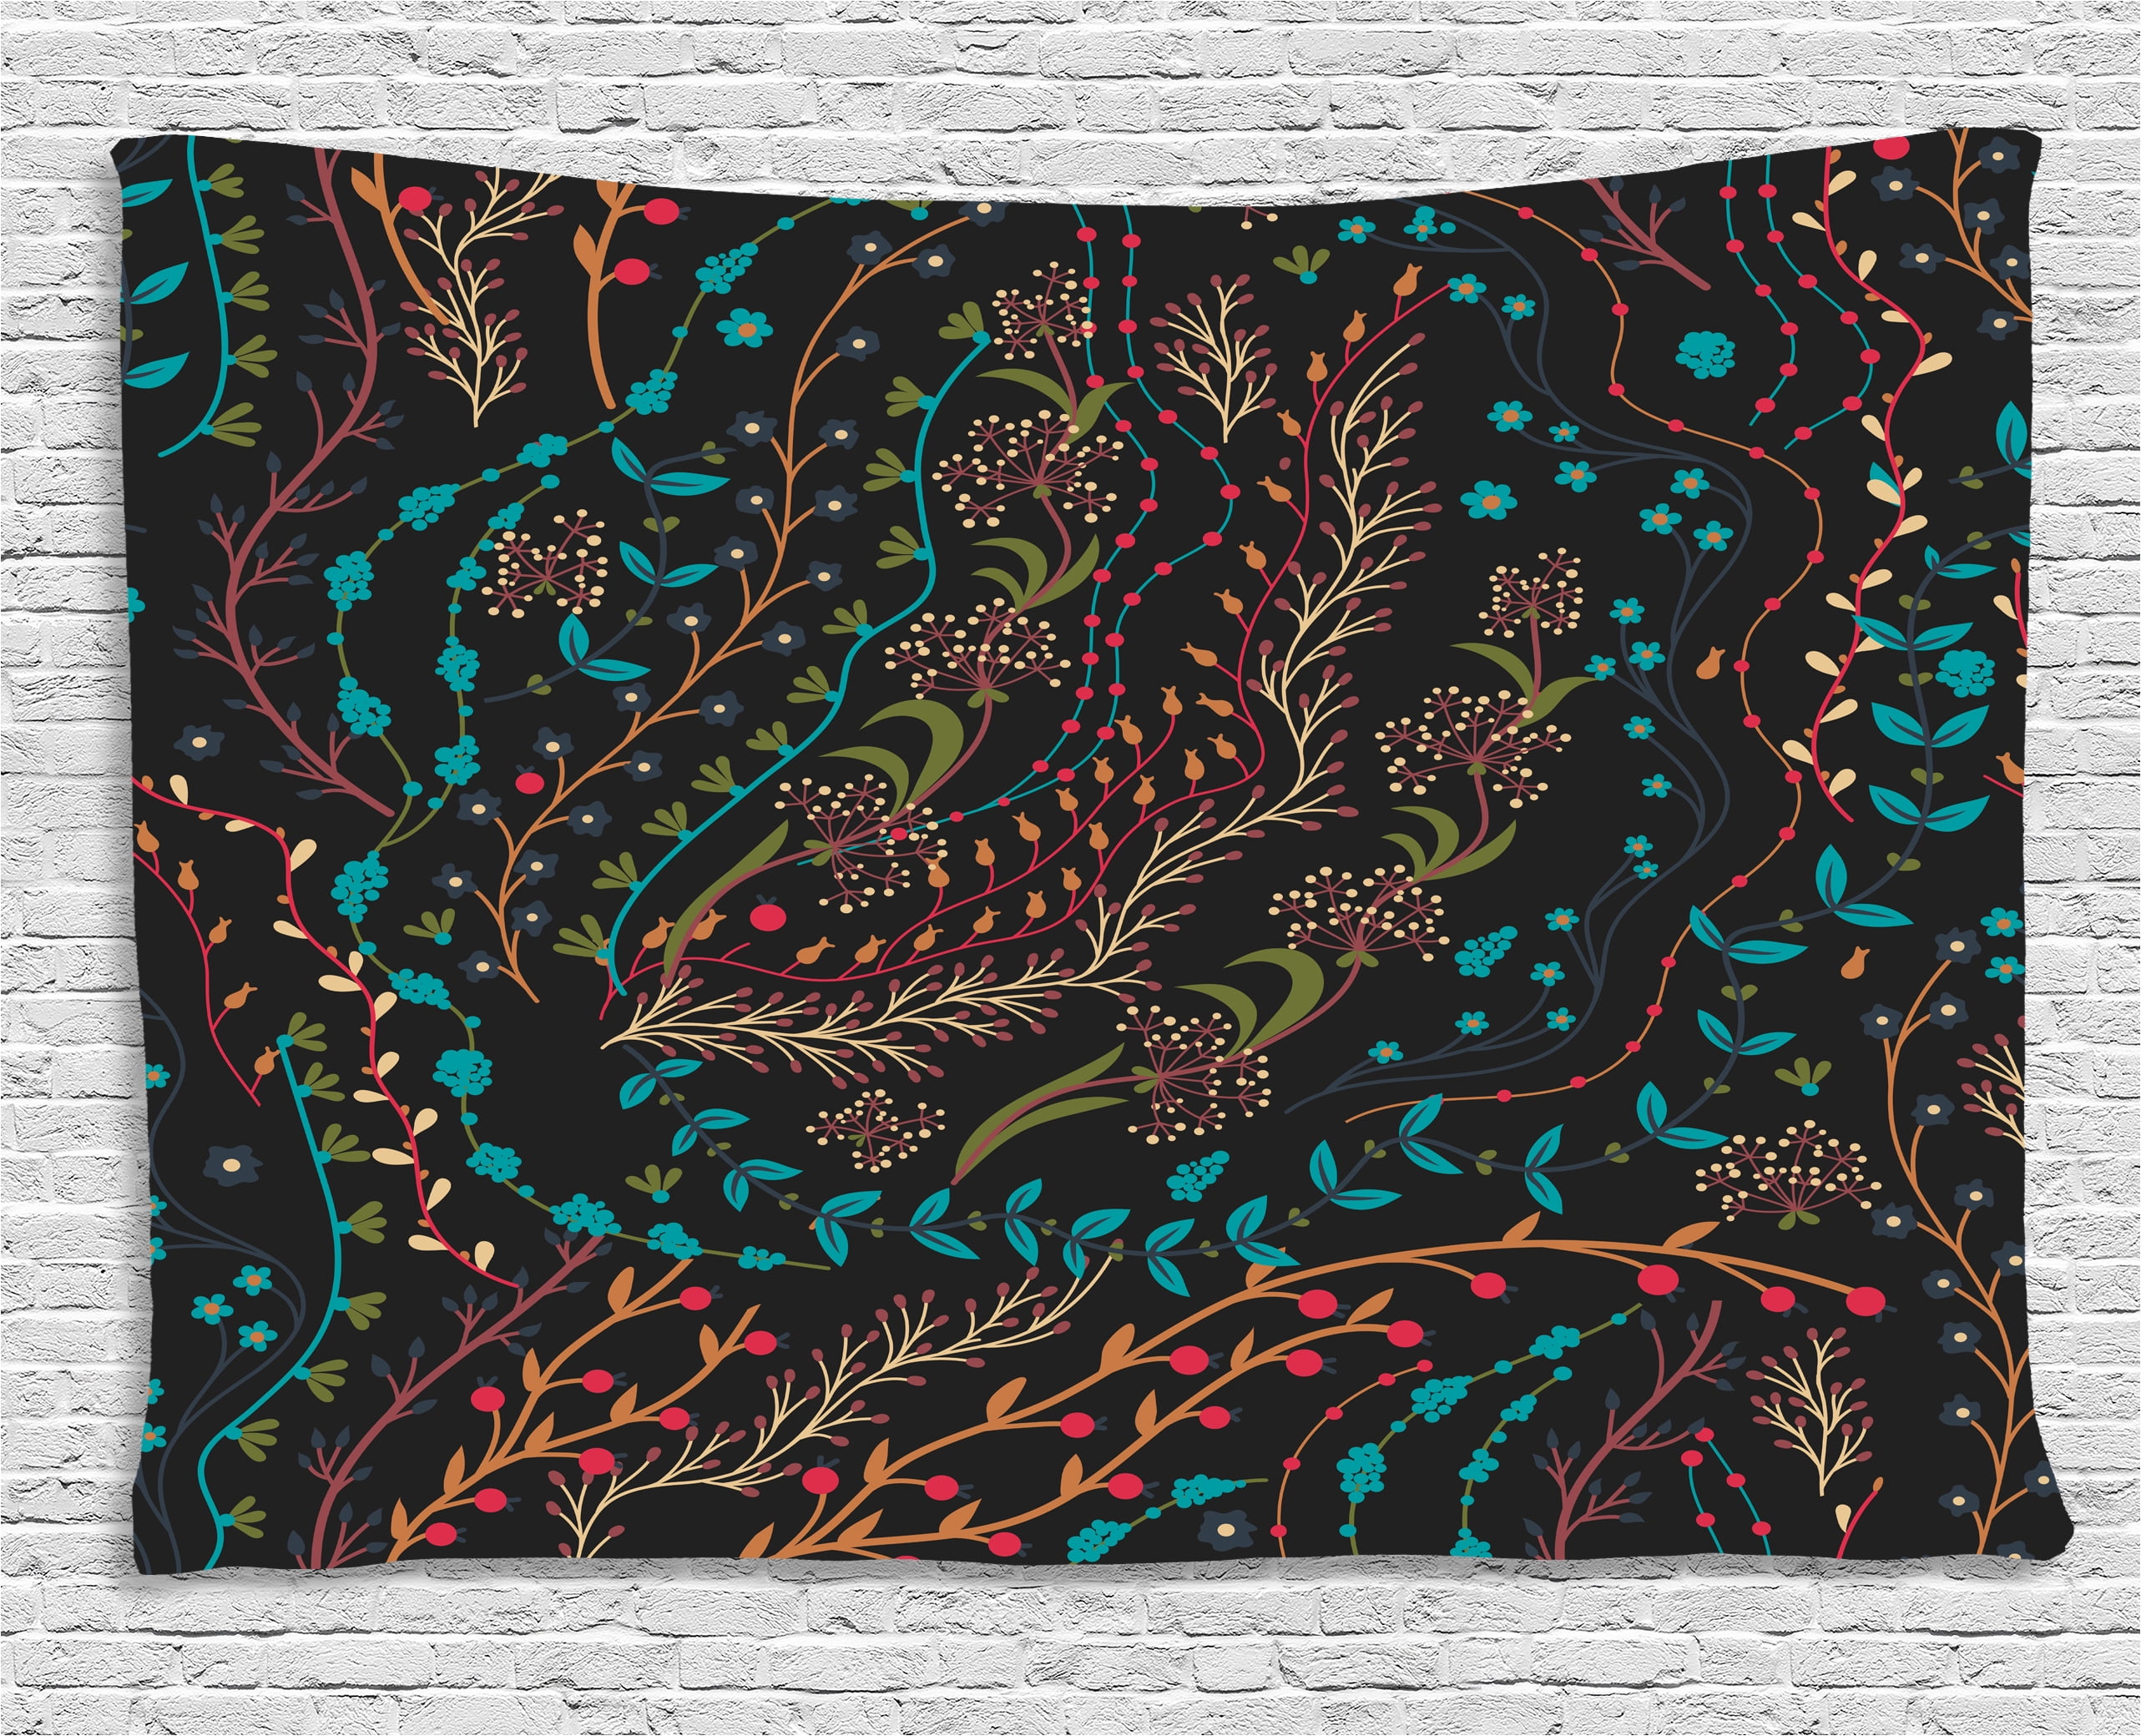 Floral Tapestry, Colorful Herbs and Flowering Stems on Dark Backdrop